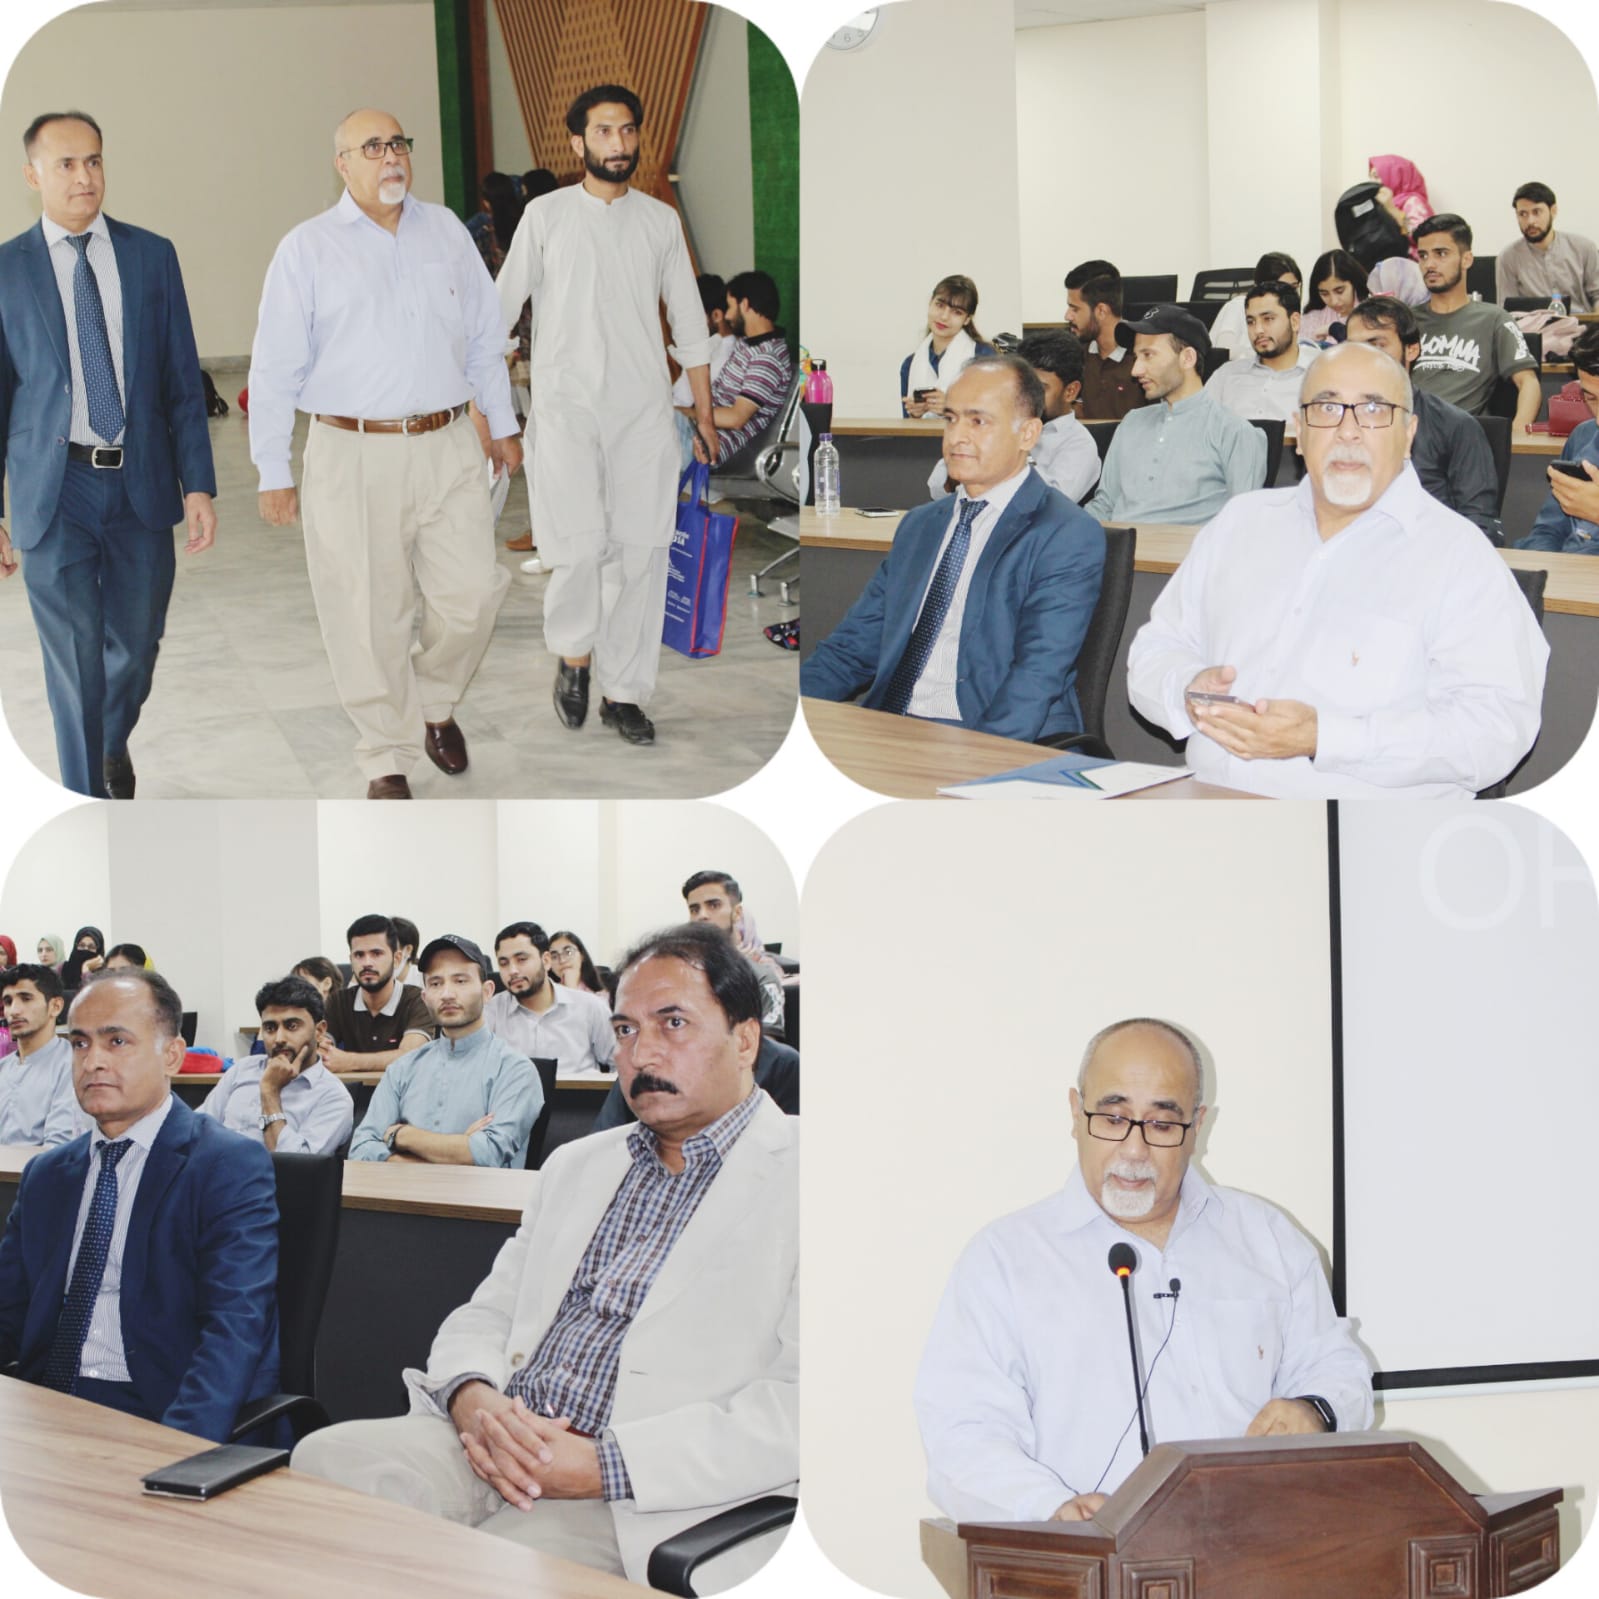 Seminar on Fulbright Scholarships was Organized by Career Planning Society (CPS) and Departmental Facilitation and Support Society (DFSC) on 23rd May 2023